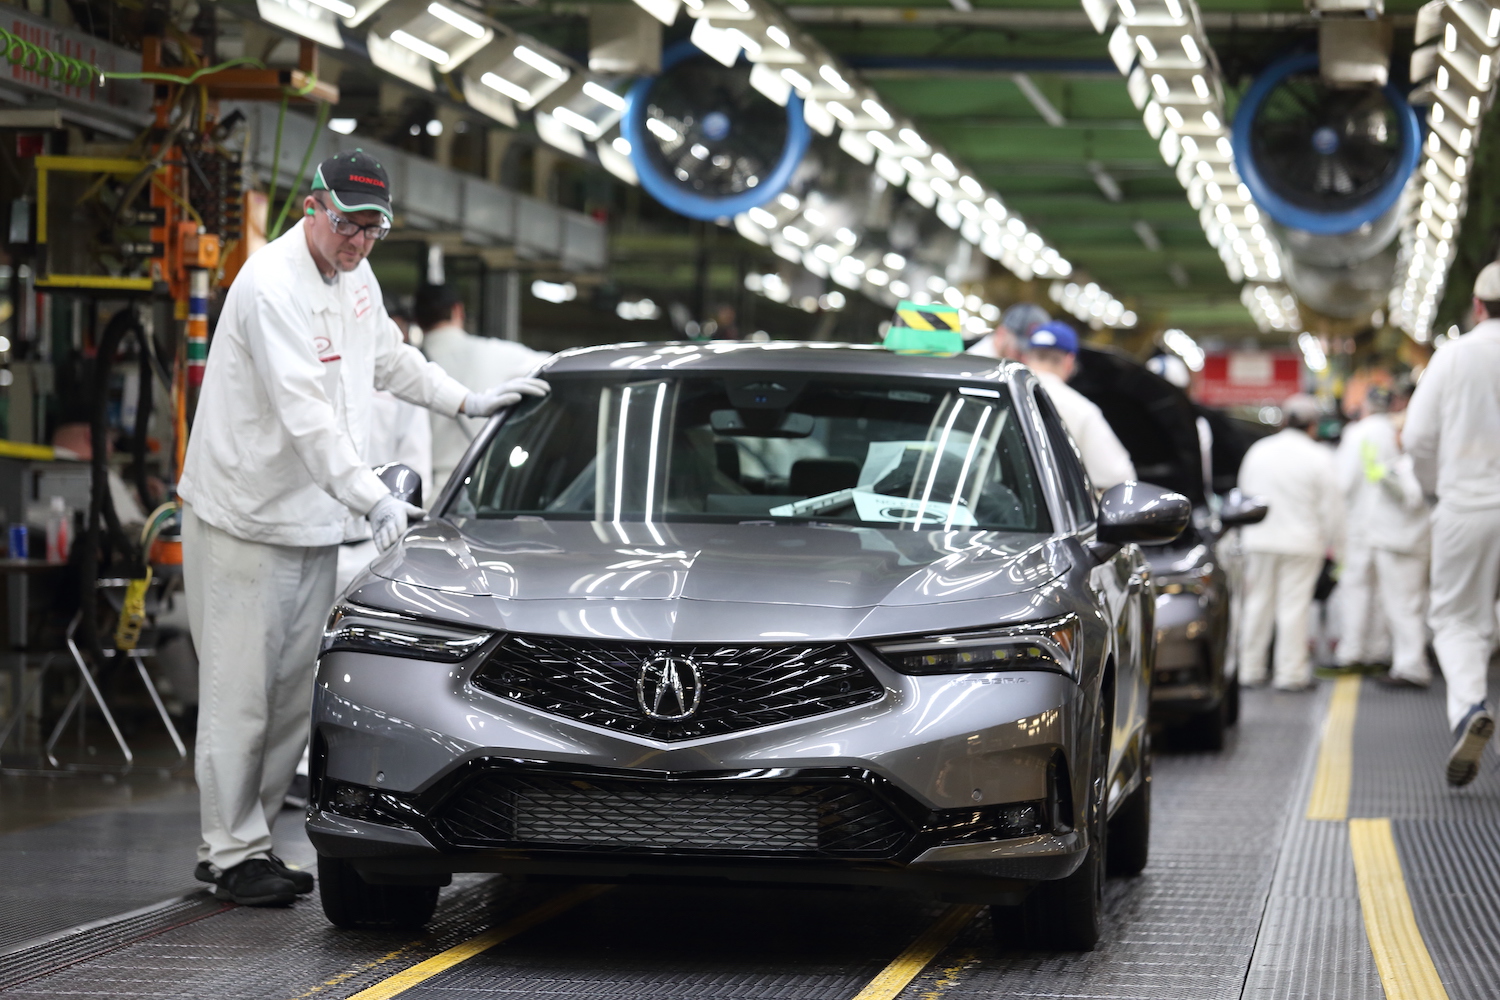 Ohio factory worker putting the finishing touches on an all-new 2023 Acura Integra